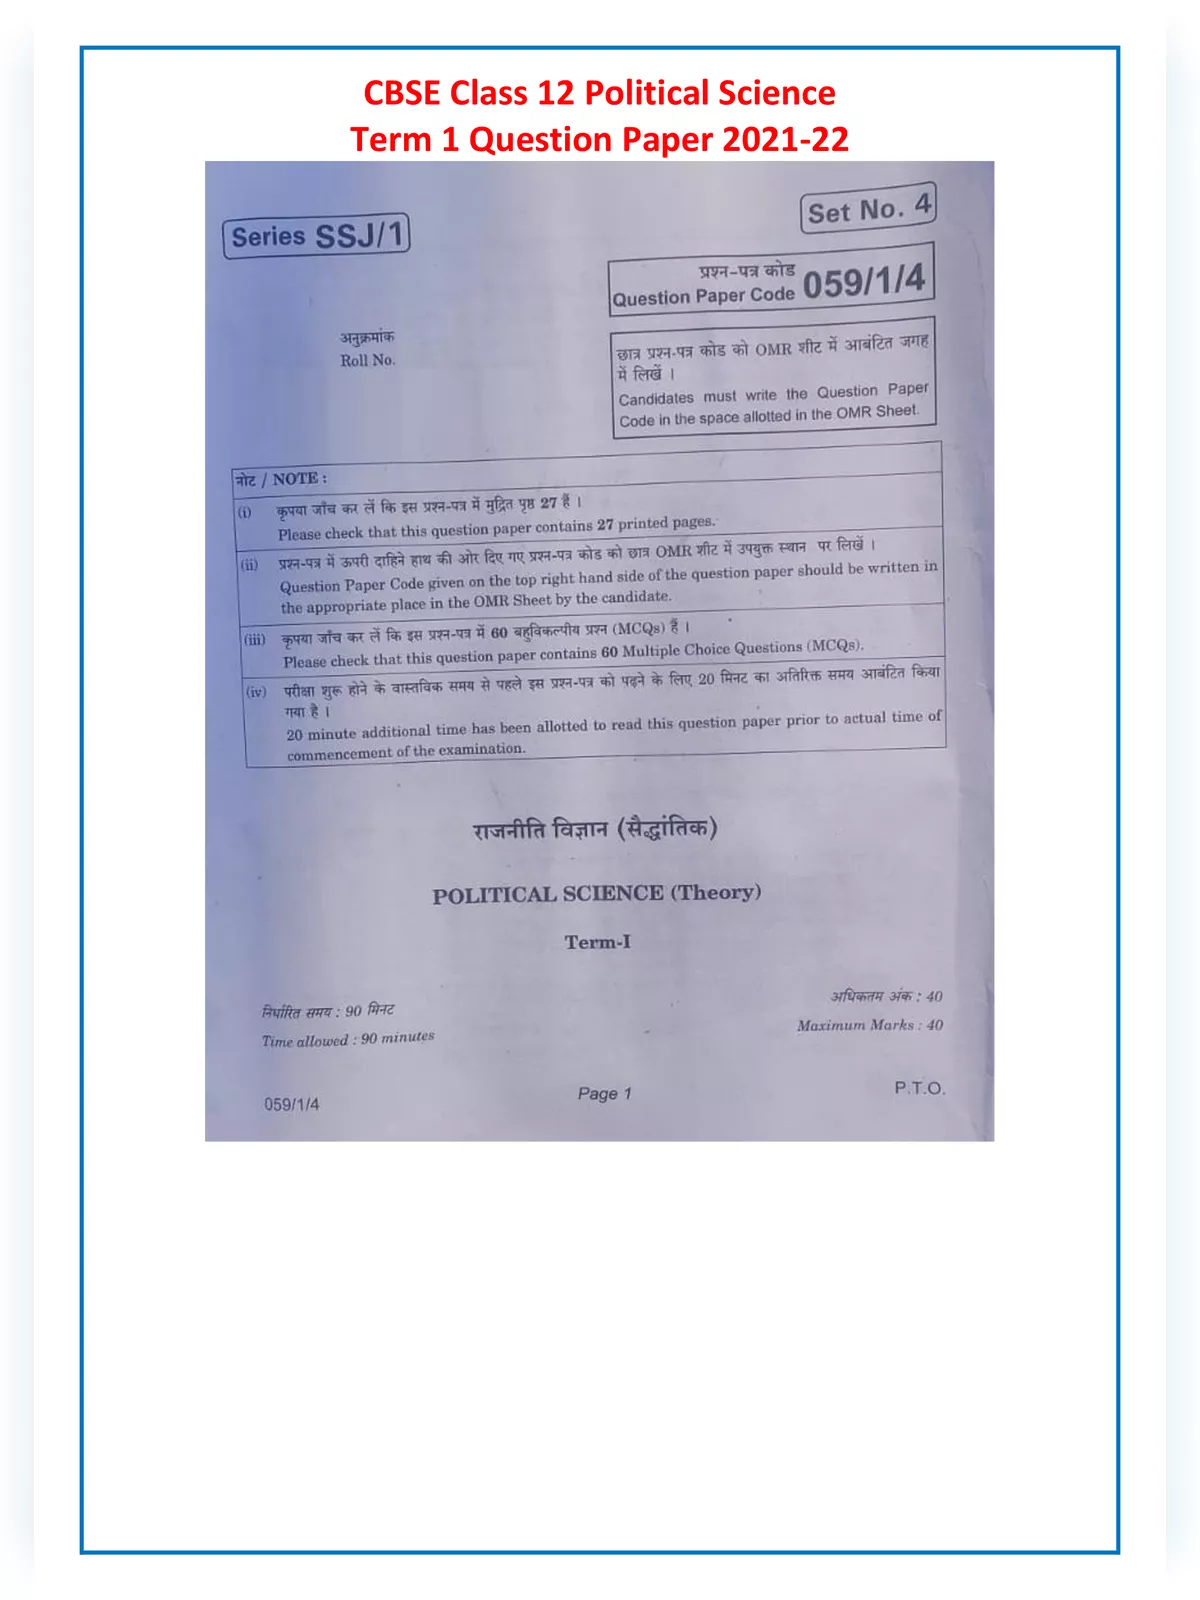 CBSE Class 12th Political Science Question Paper 2021 with Solution